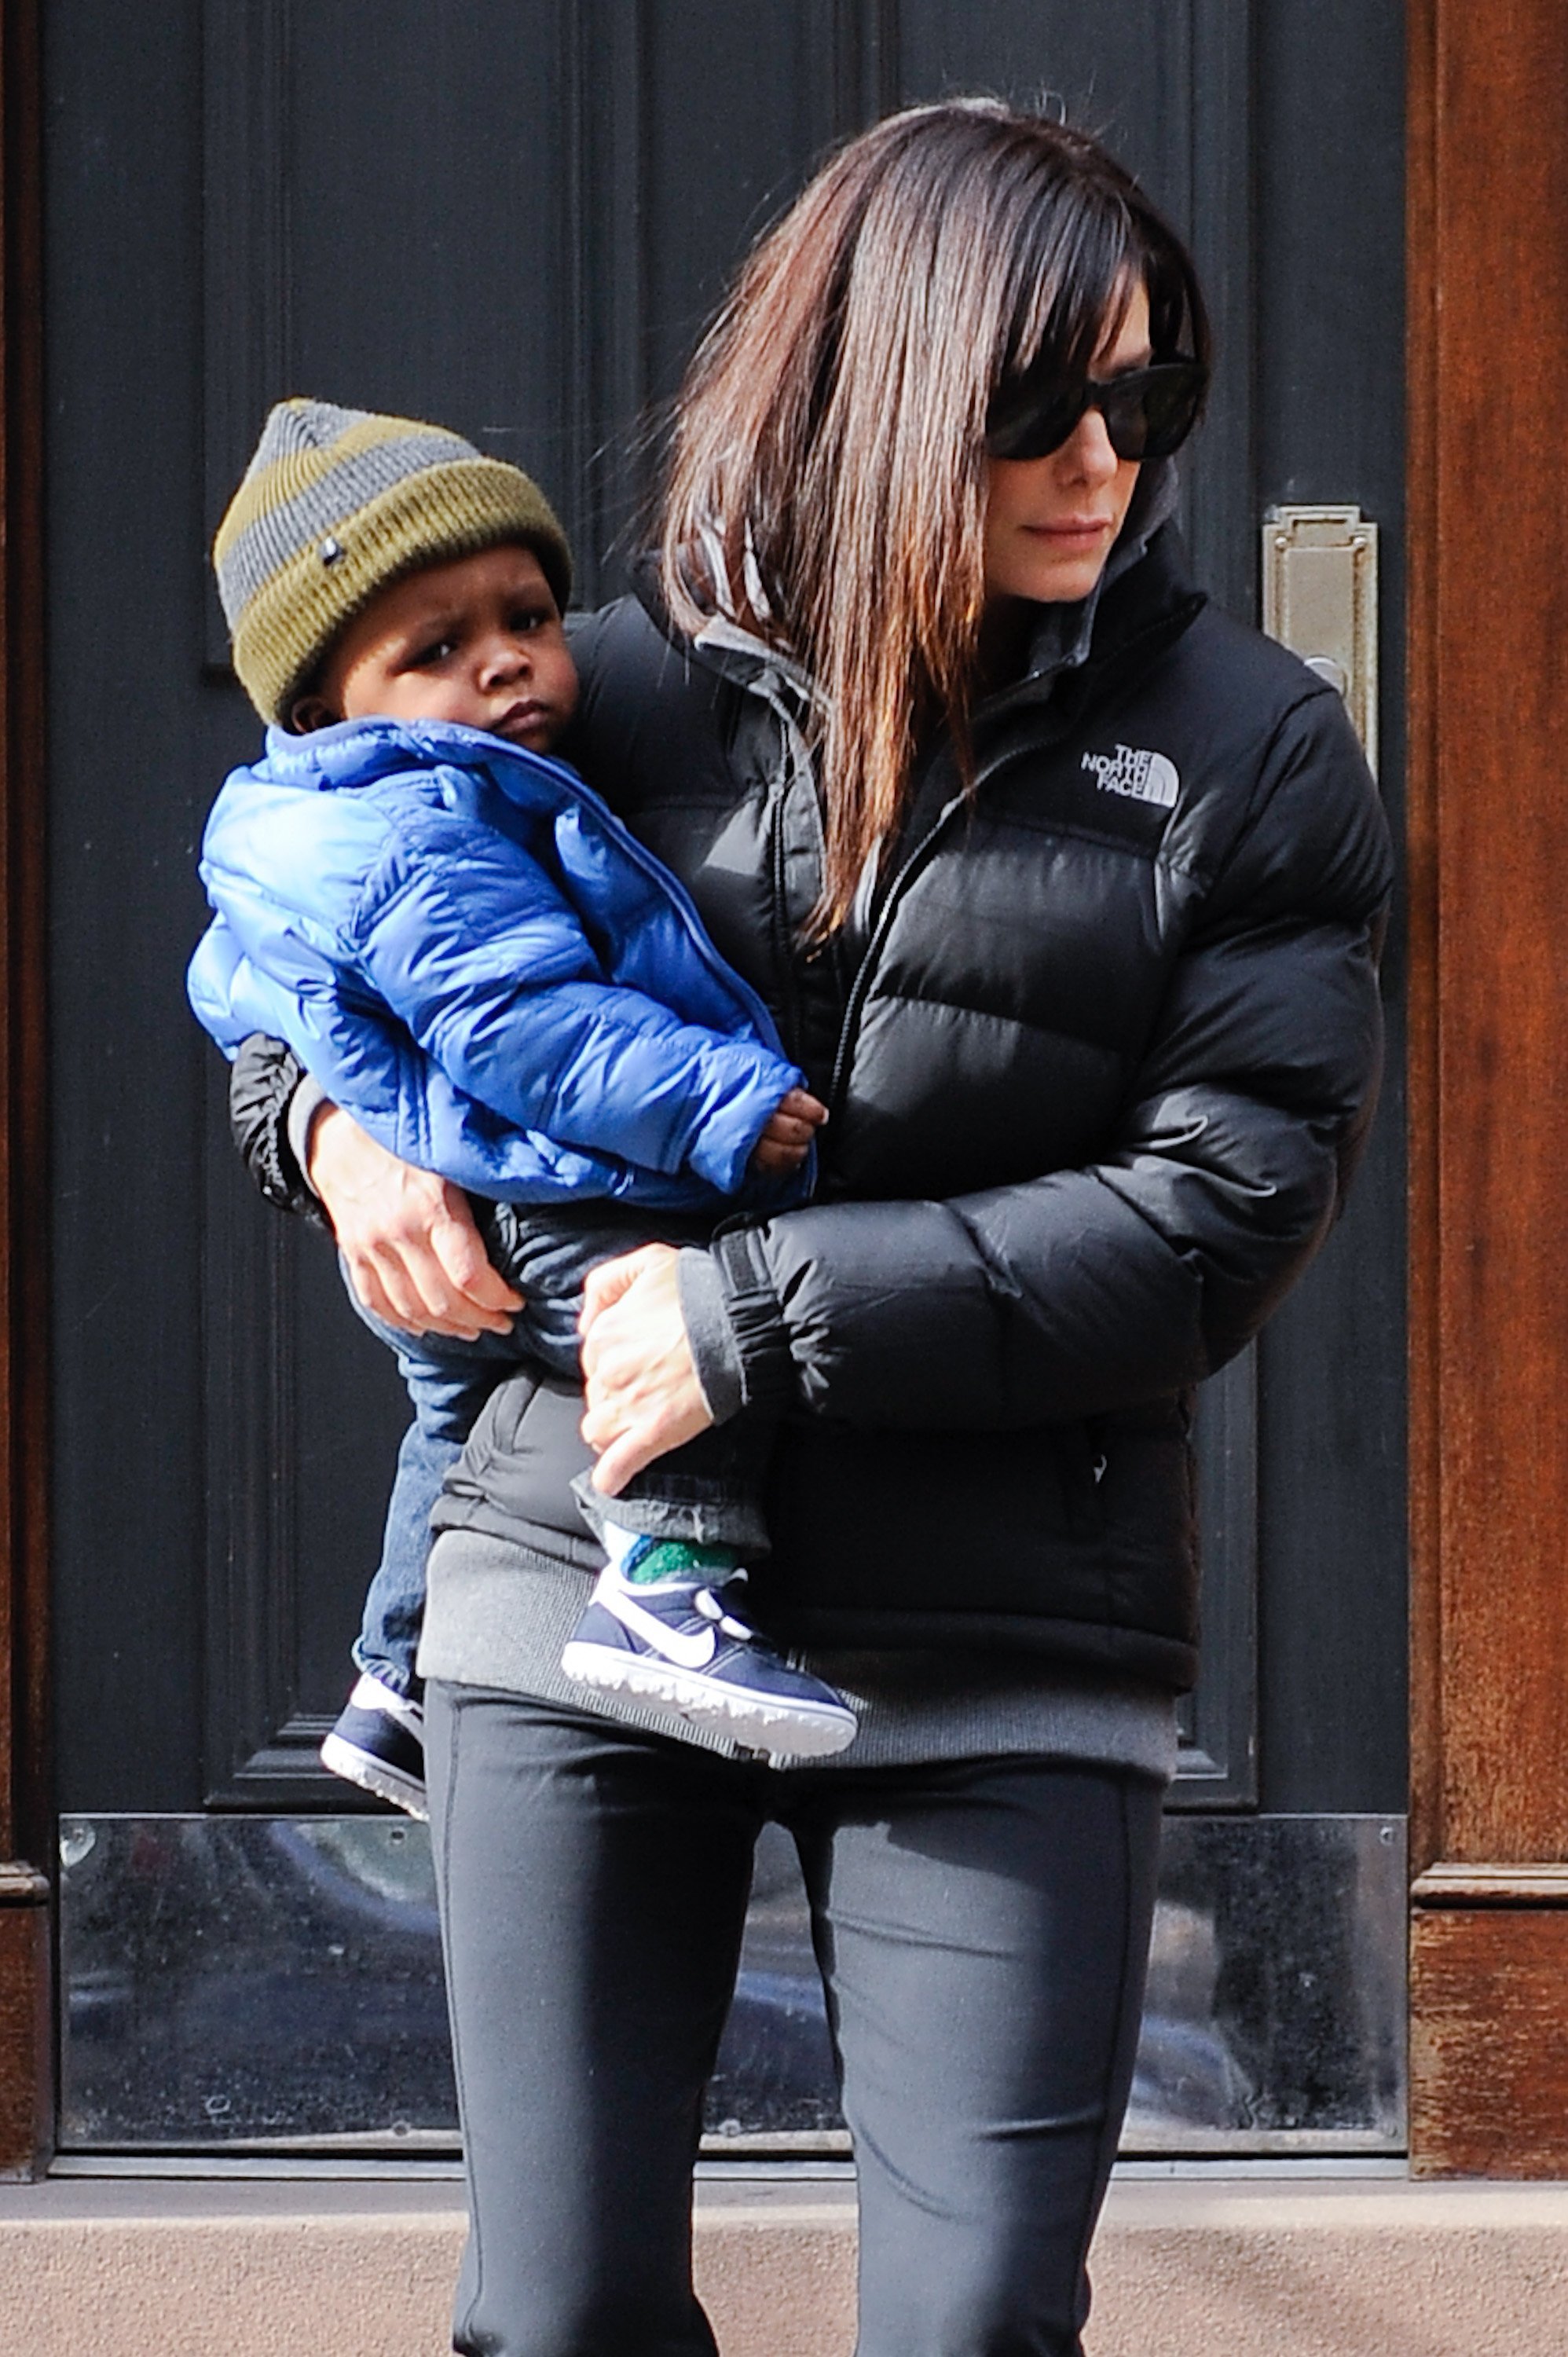 Sandra Bullock and her son Louis Bullock leave their Soho home on January 20, 2011 | Photo: GettyImages